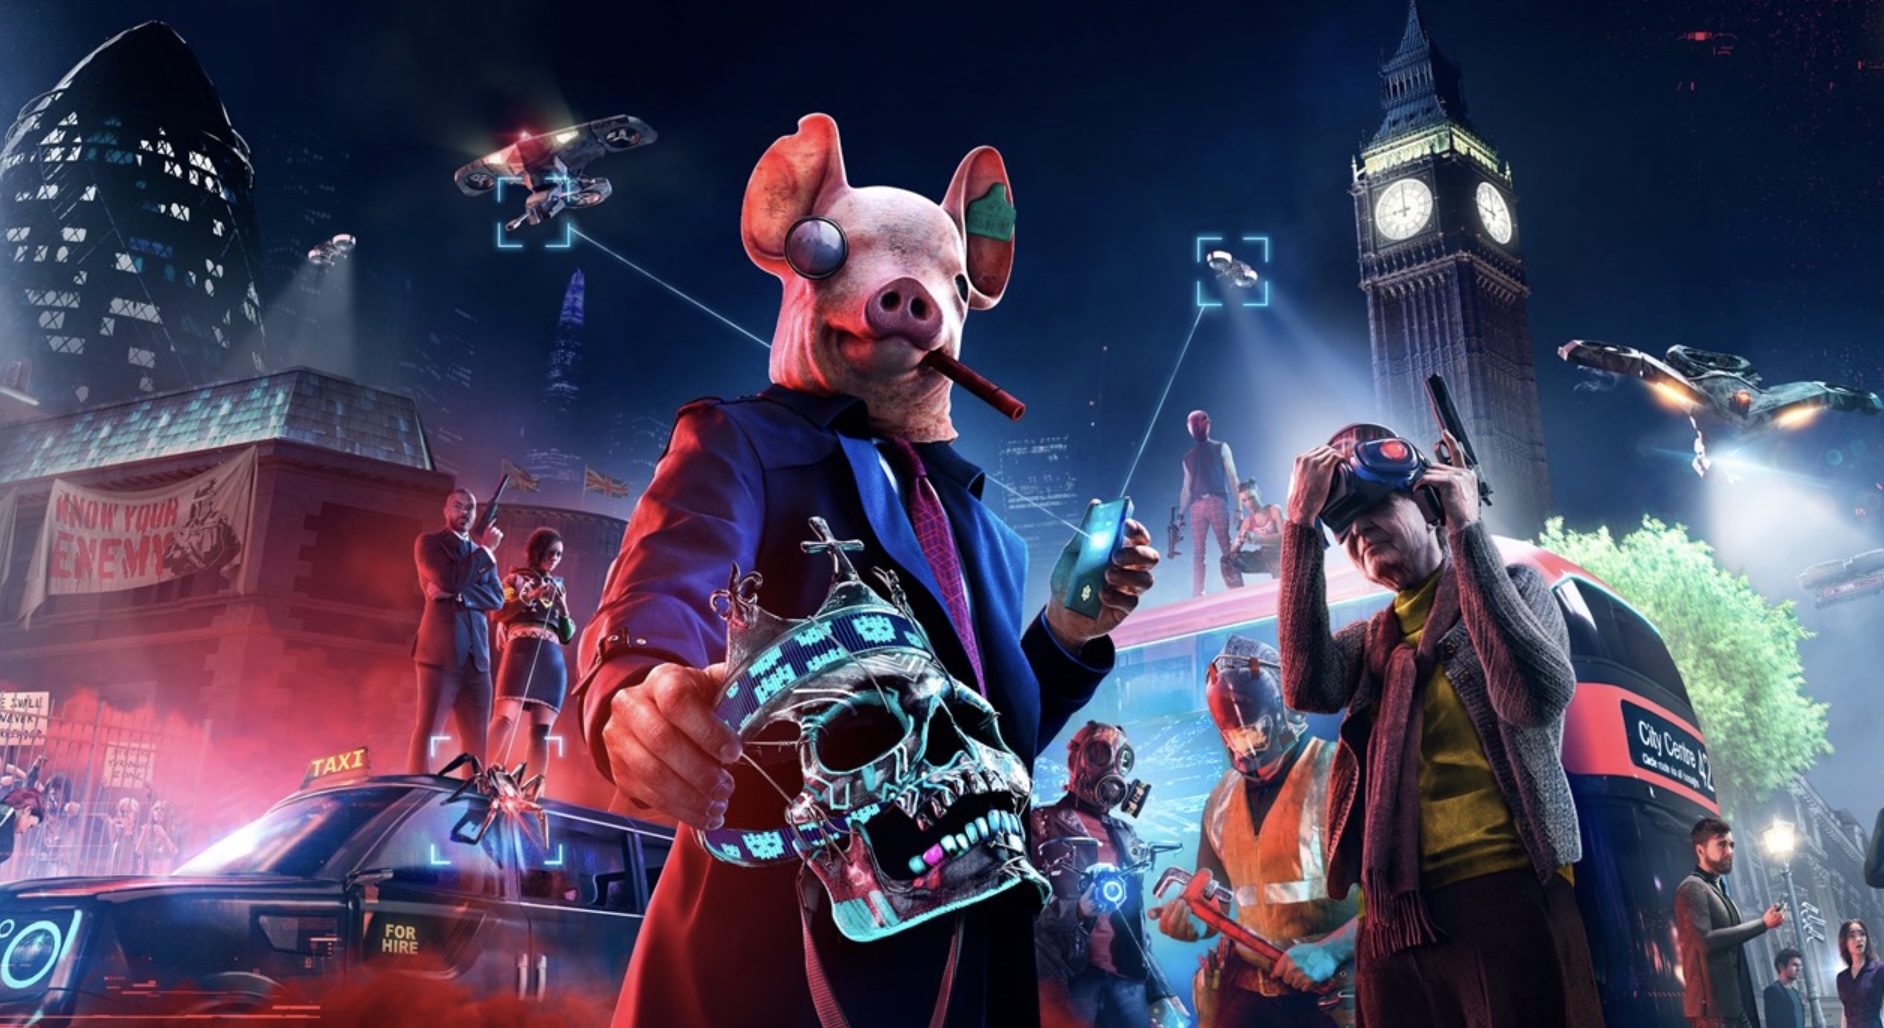 Watch Dogs Legion Update 1.17 Patch Notes